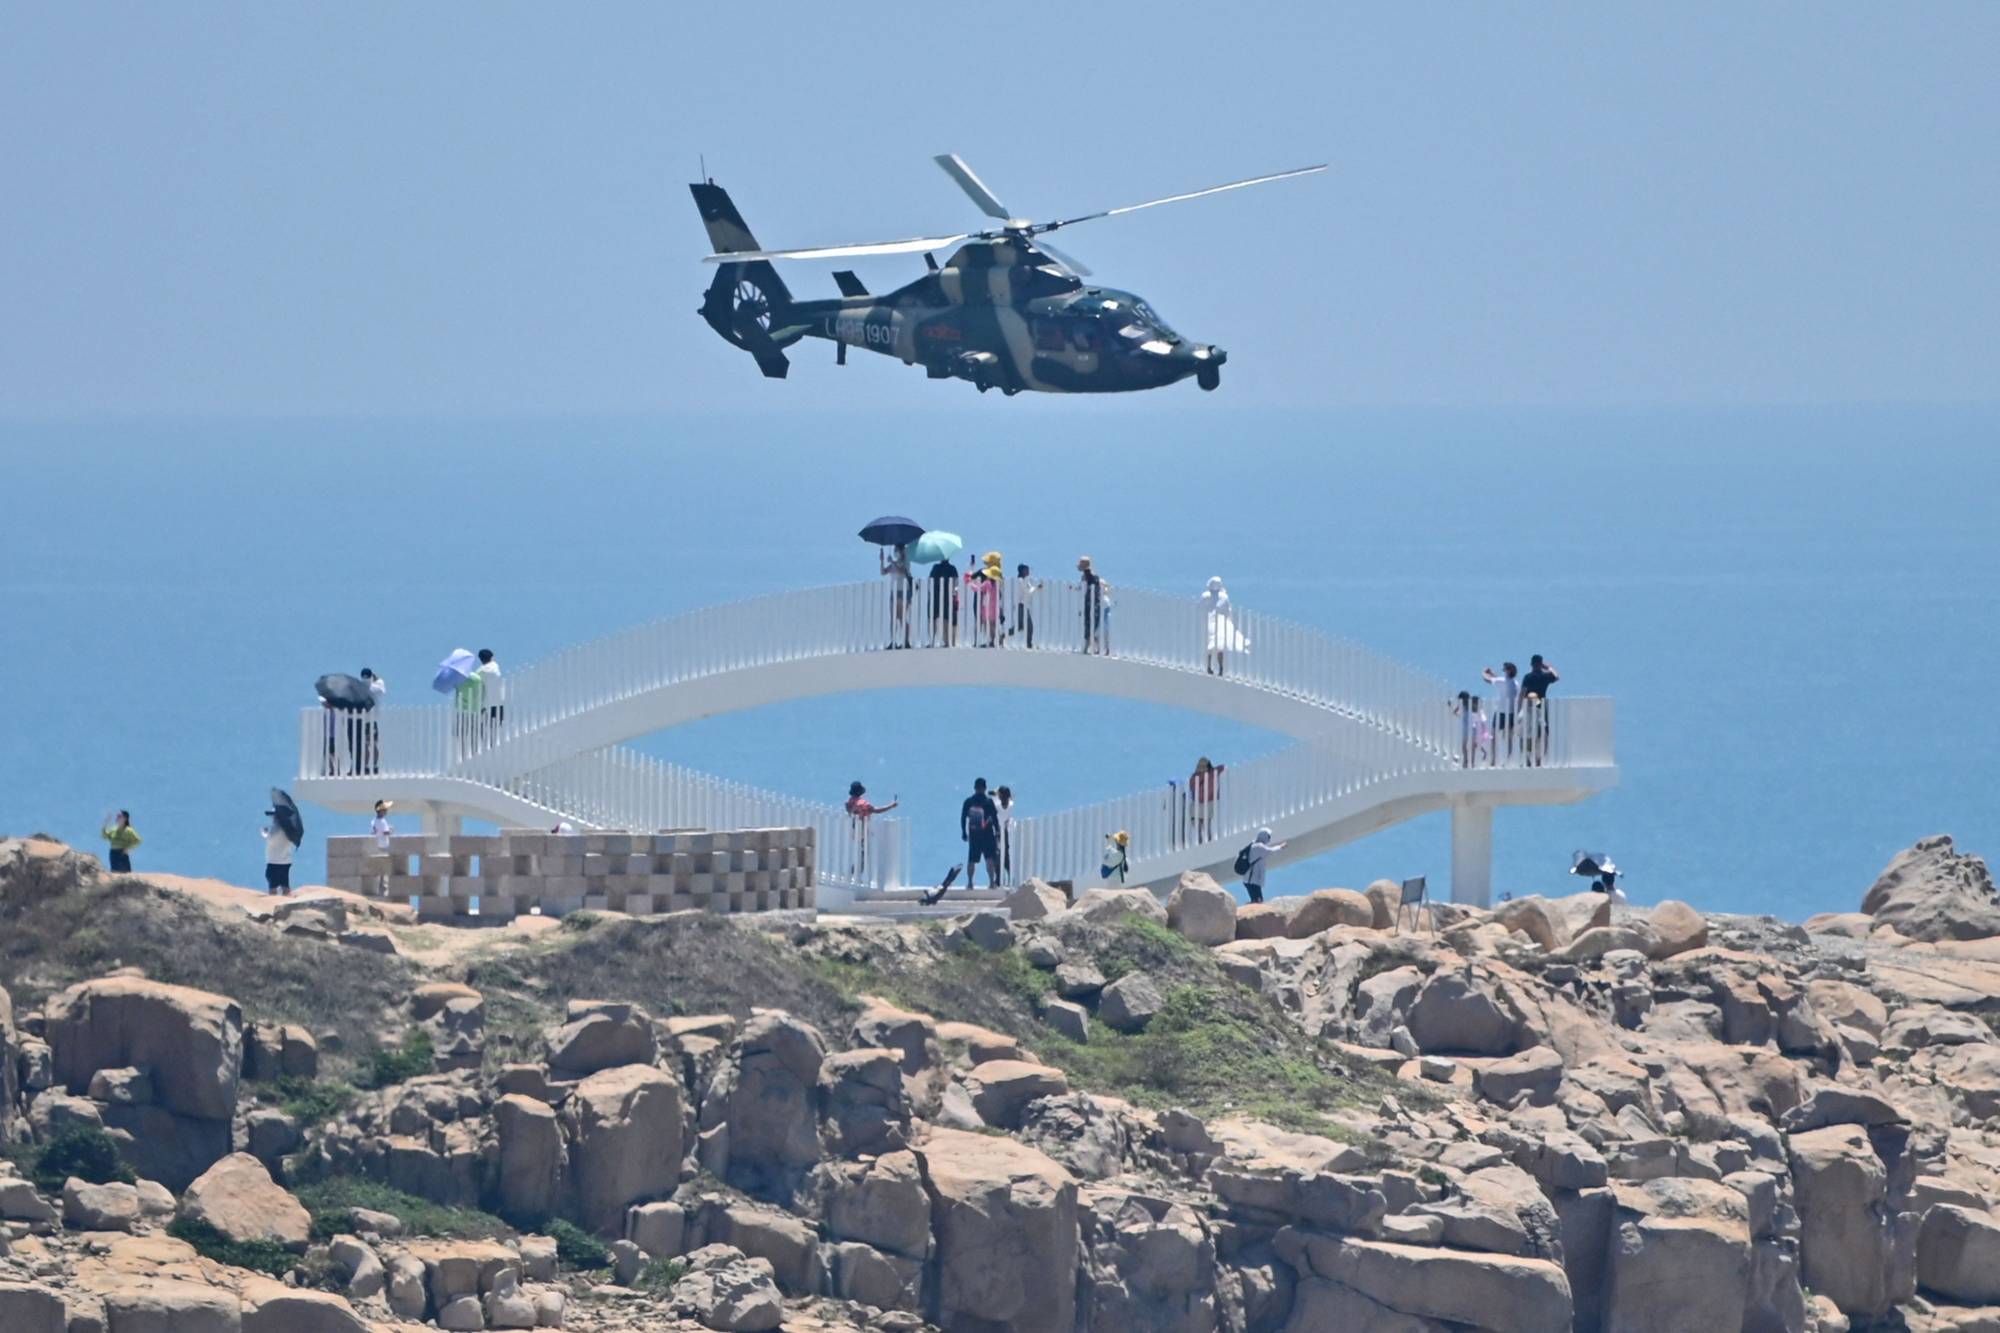 Tourists look on as a Chinese military helicopter flies past Pingtan island, one of mainland China's closest points to Taiwan, in Fujian province on Thursday, ahead of massive military drills off Taiwan